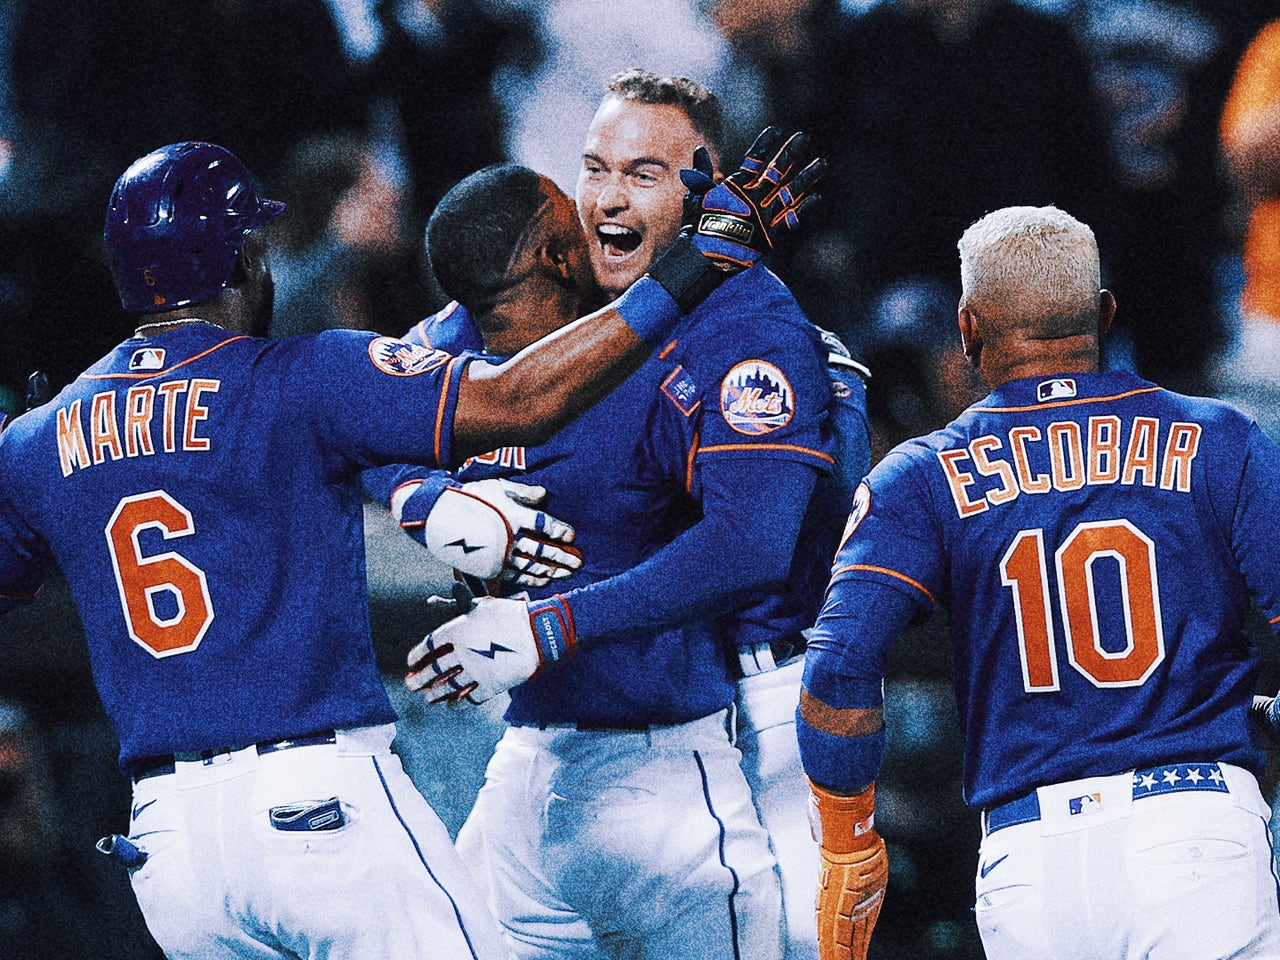 Nimmo gives Mets 4-3, 10-inning win over Yanks on night of mental